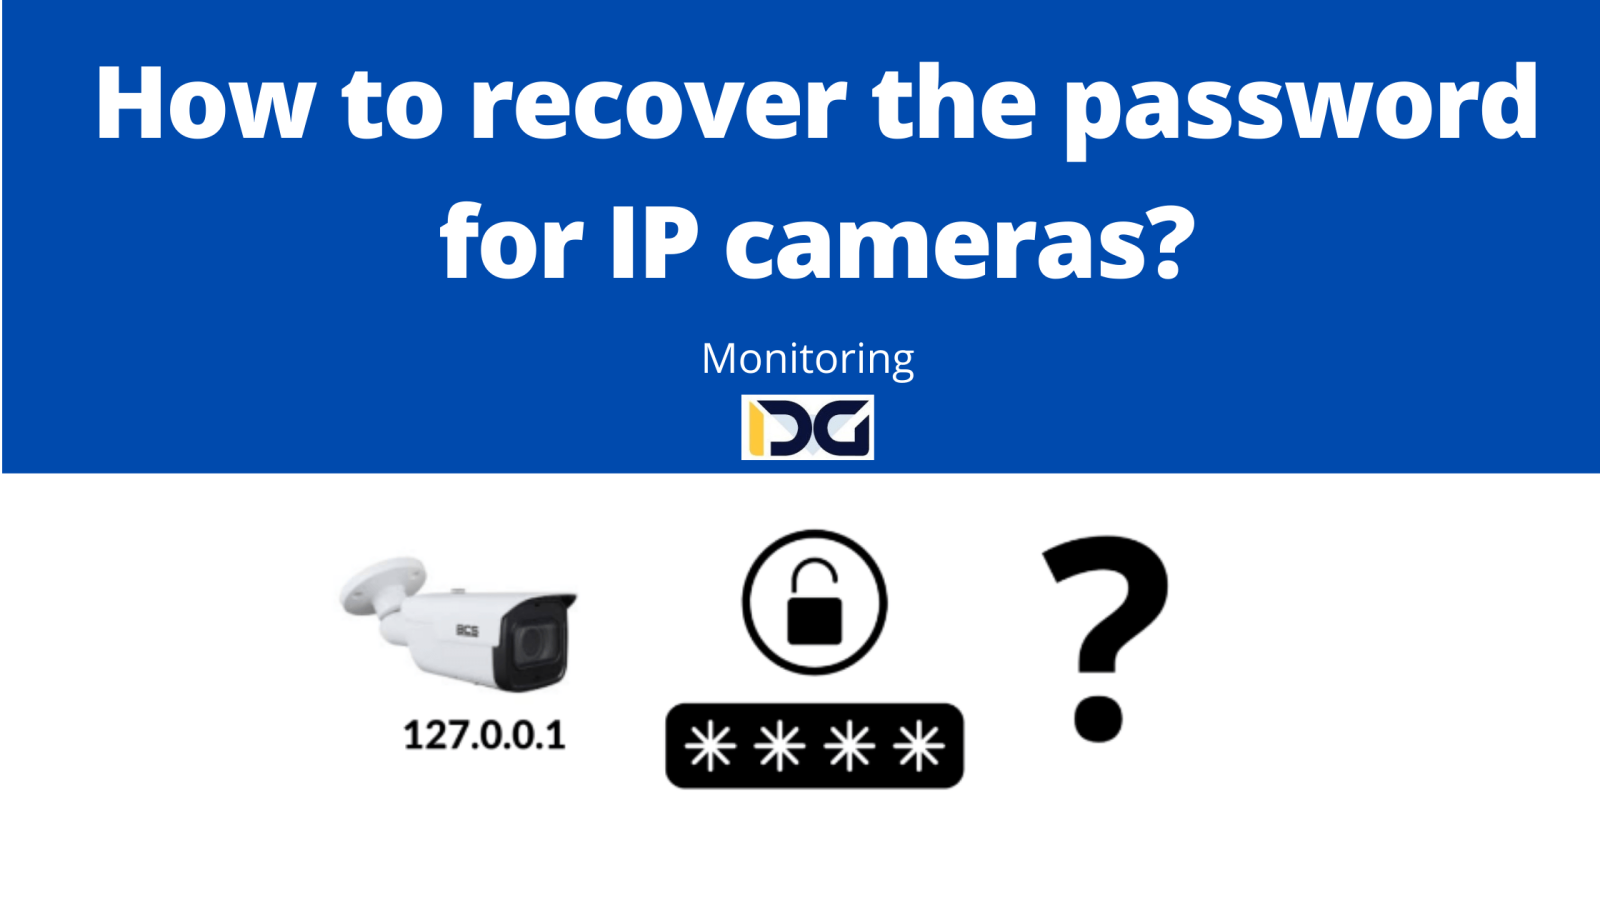 How to recover the password for IP cameras?